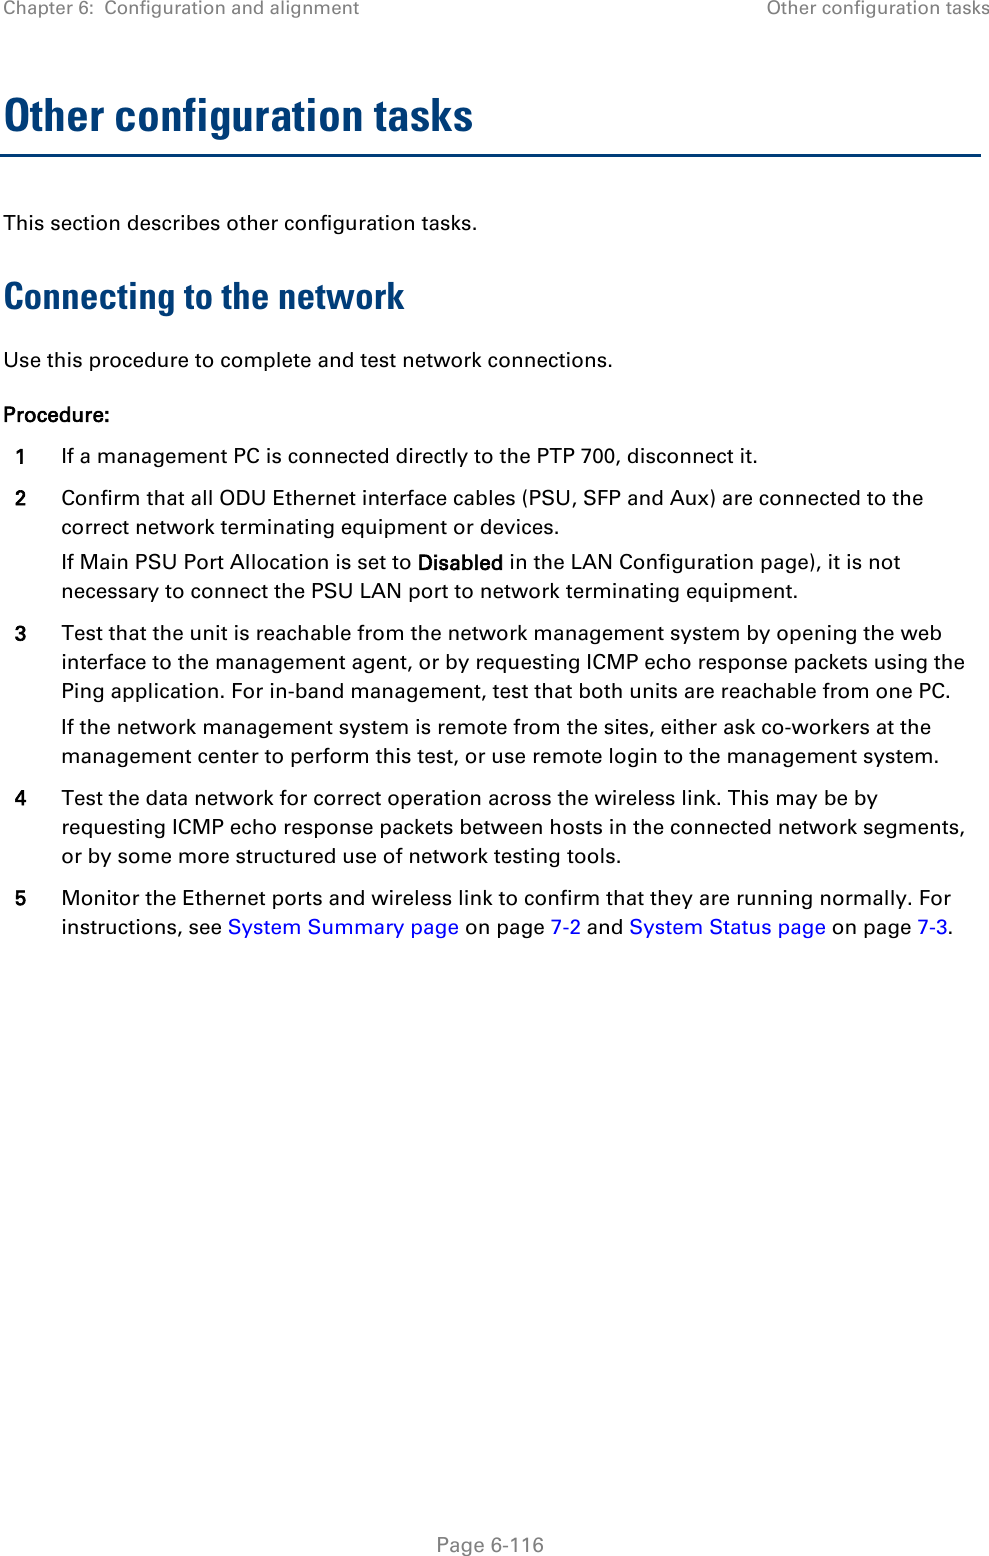 Chapter 6:  Configuration and alignment Other configuration tasks  Other configuration tasks This section describes other configuration tasks. Connecting to the network Use this procedure to complete and test network connections. Procedure: 1 If a management PC is connected directly to the PTP 700, disconnect it. 2 Confirm that all ODU Ethernet interface cables (PSU, SFP and Aux) are connected to the correct network terminating equipment or devices. If Main PSU Port Allocation is set to Disabled in the LAN Configuration page), it is not necessary to connect the PSU LAN port to network terminating equipment. 3 Test that the unit is reachable from the network management system by opening the web interface to the management agent, or by requesting ICMP echo response packets using the Ping application. For in-band management, test that both units are reachable from one PC. If the network management system is remote from the sites, either ask co-workers at the management center to perform this test, or use remote login to the management system. 4 Test the data network for correct operation across the wireless link. This may be by requesting ICMP echo response packets between hosts in the connected network segments, or by some more structured use of network testing tools. 5 Monitor the Ethernet ports and wireless link to confirm that they are running normally. For instructions, see System Summary page on page 7-2 and System Status page on page 7-3.   Page 6-116 